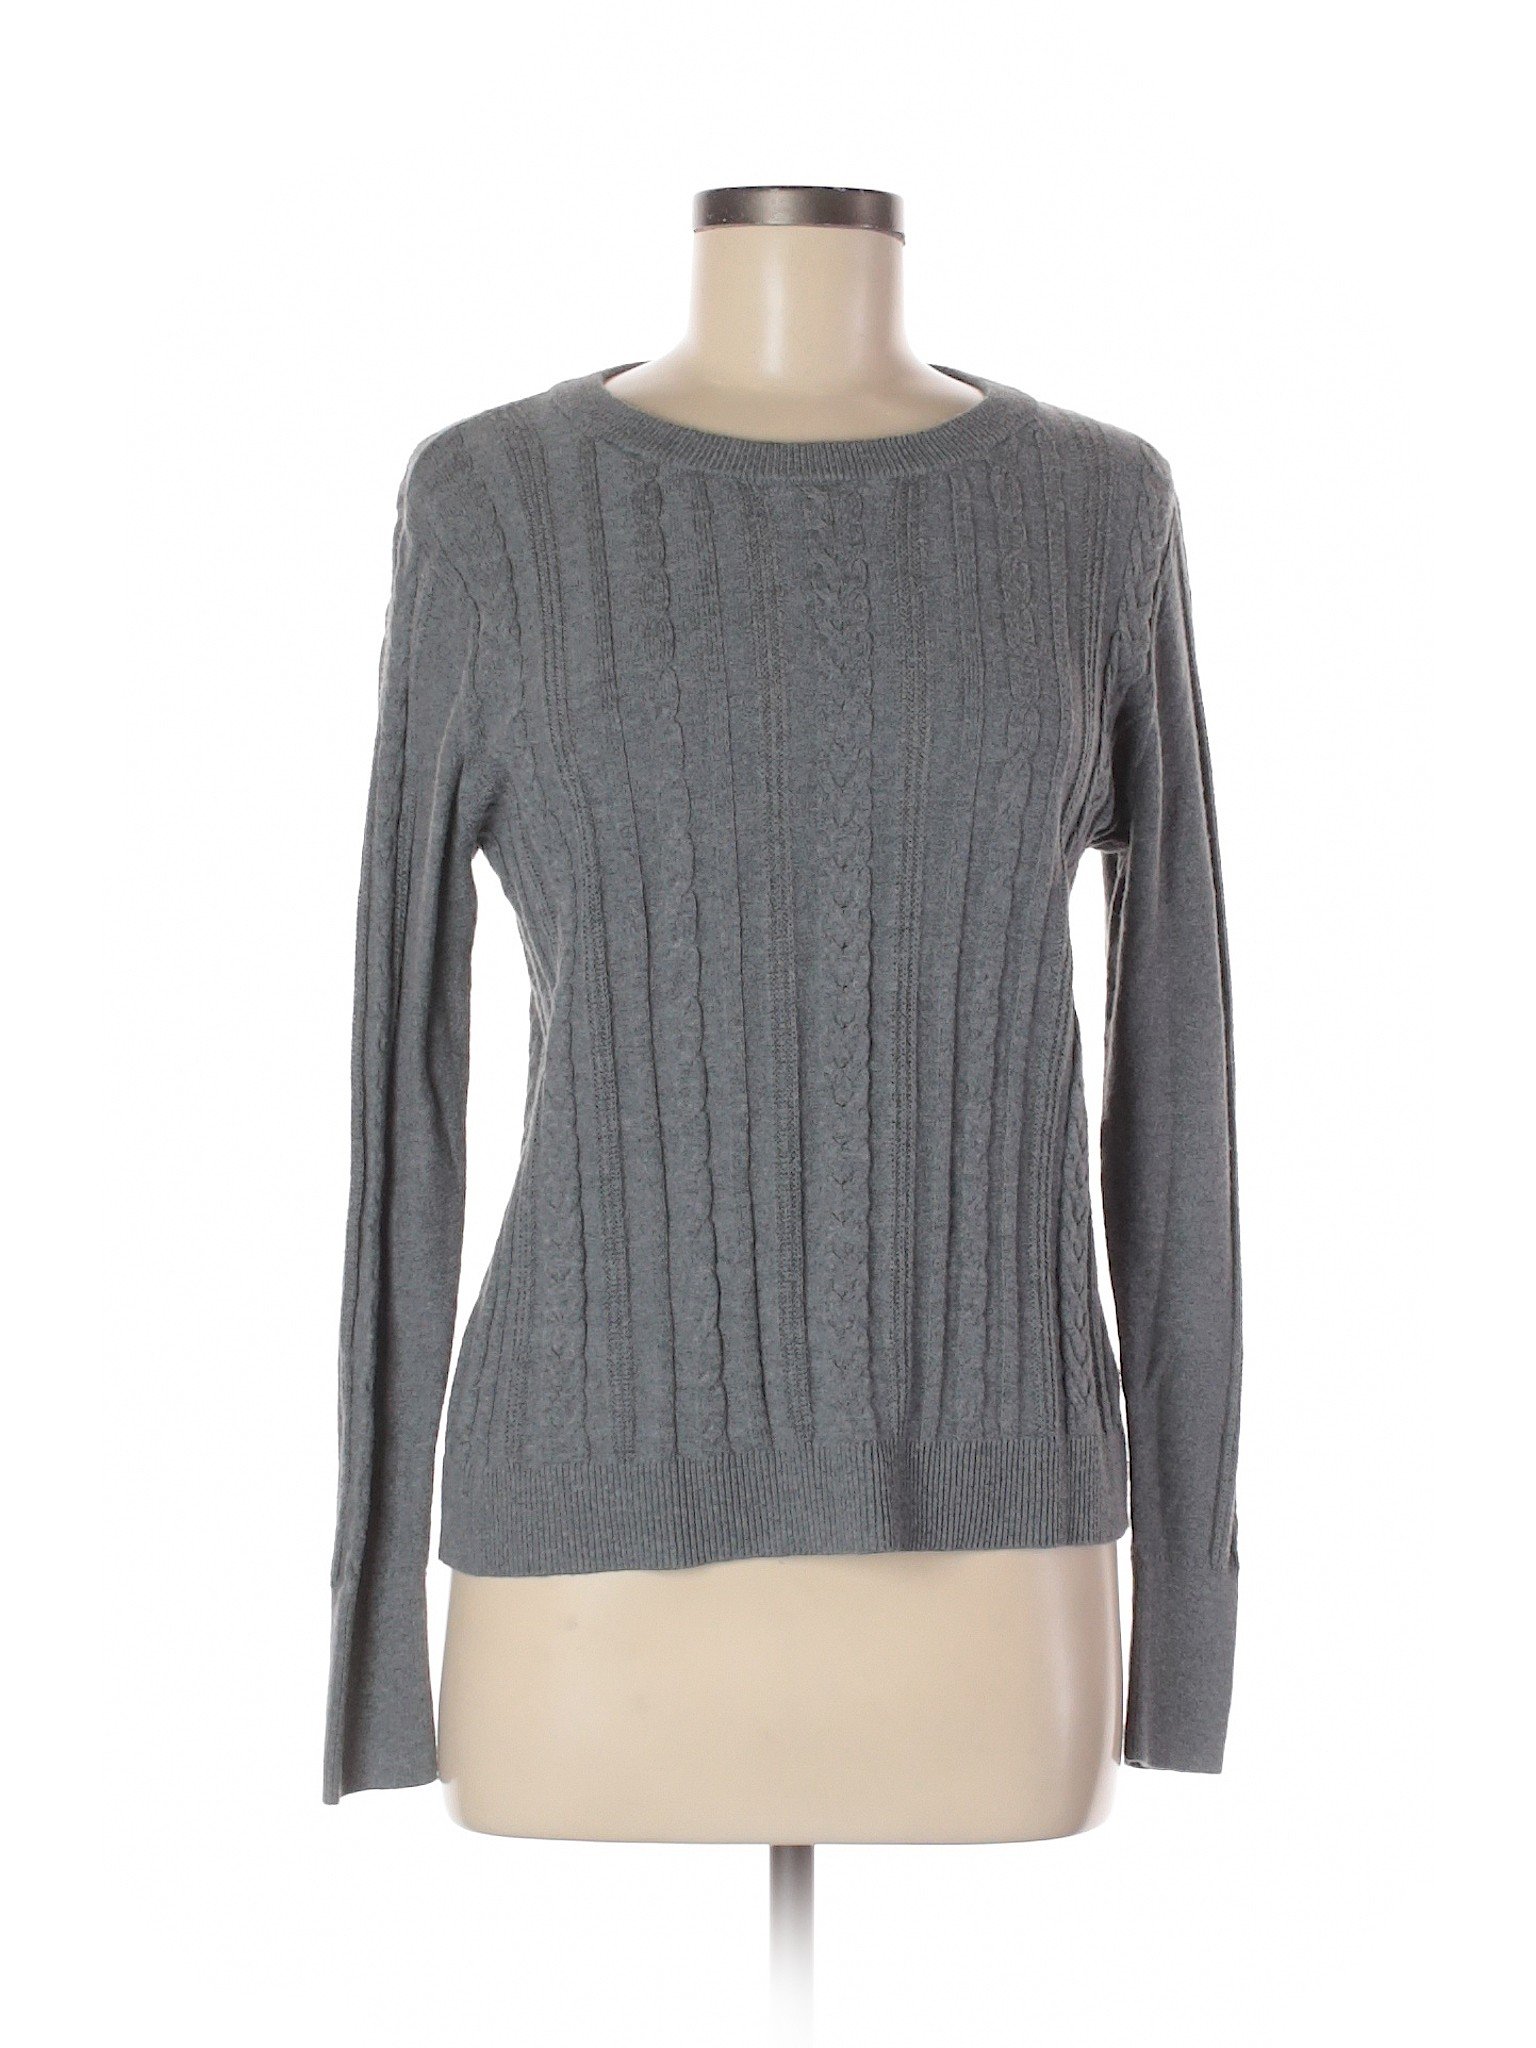 A New Day Women Gray Pullover Sweater M | eBay